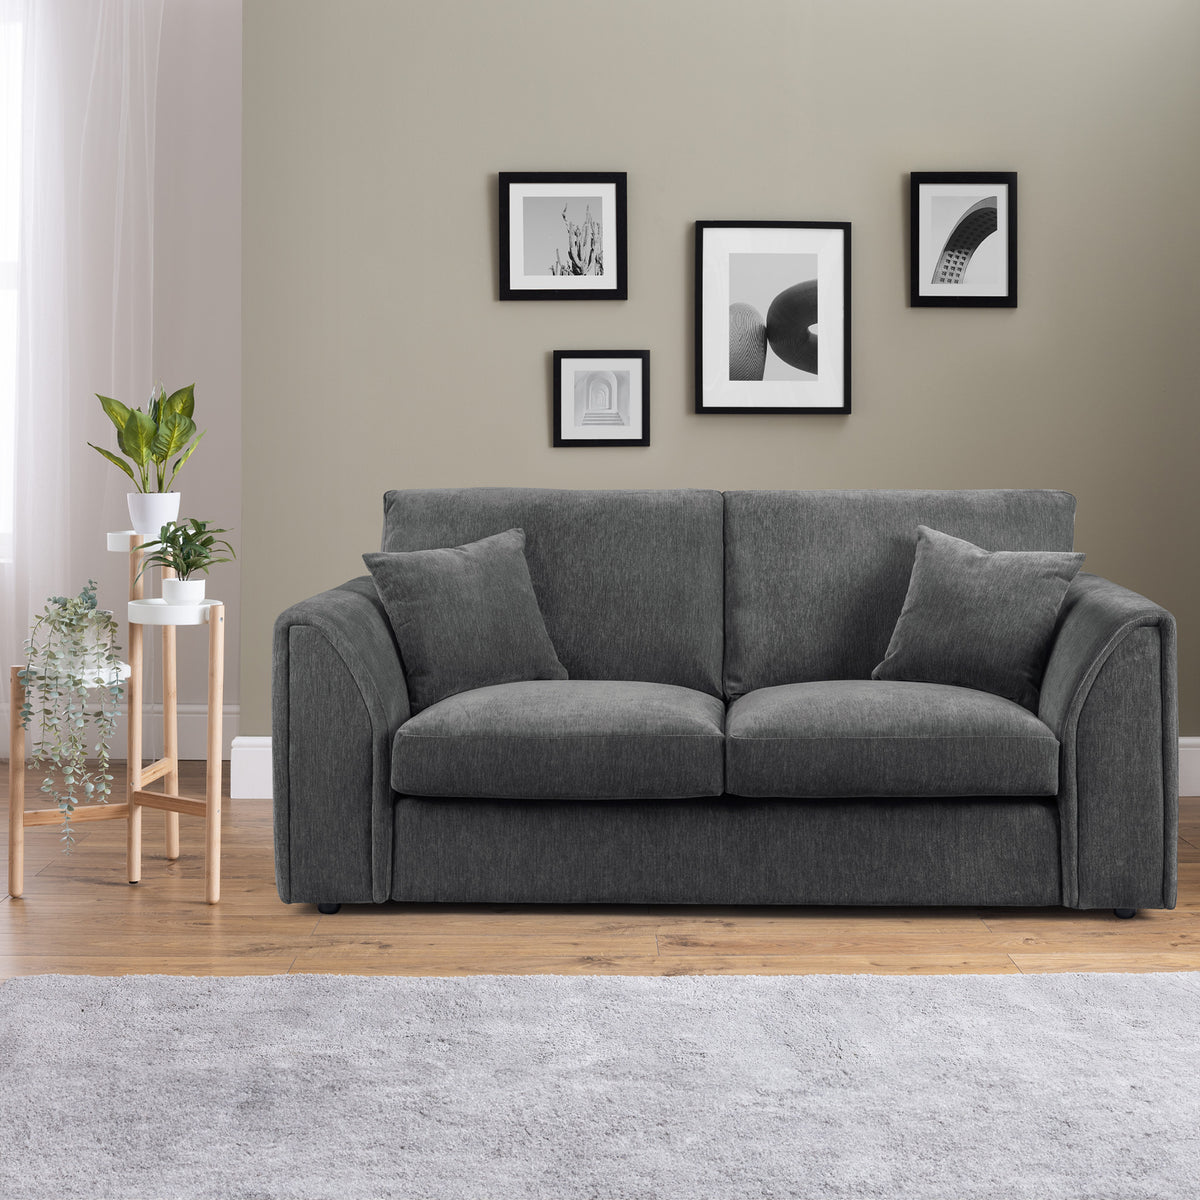 Dunford Charcoal Grey 3 Seater Sofa for living room